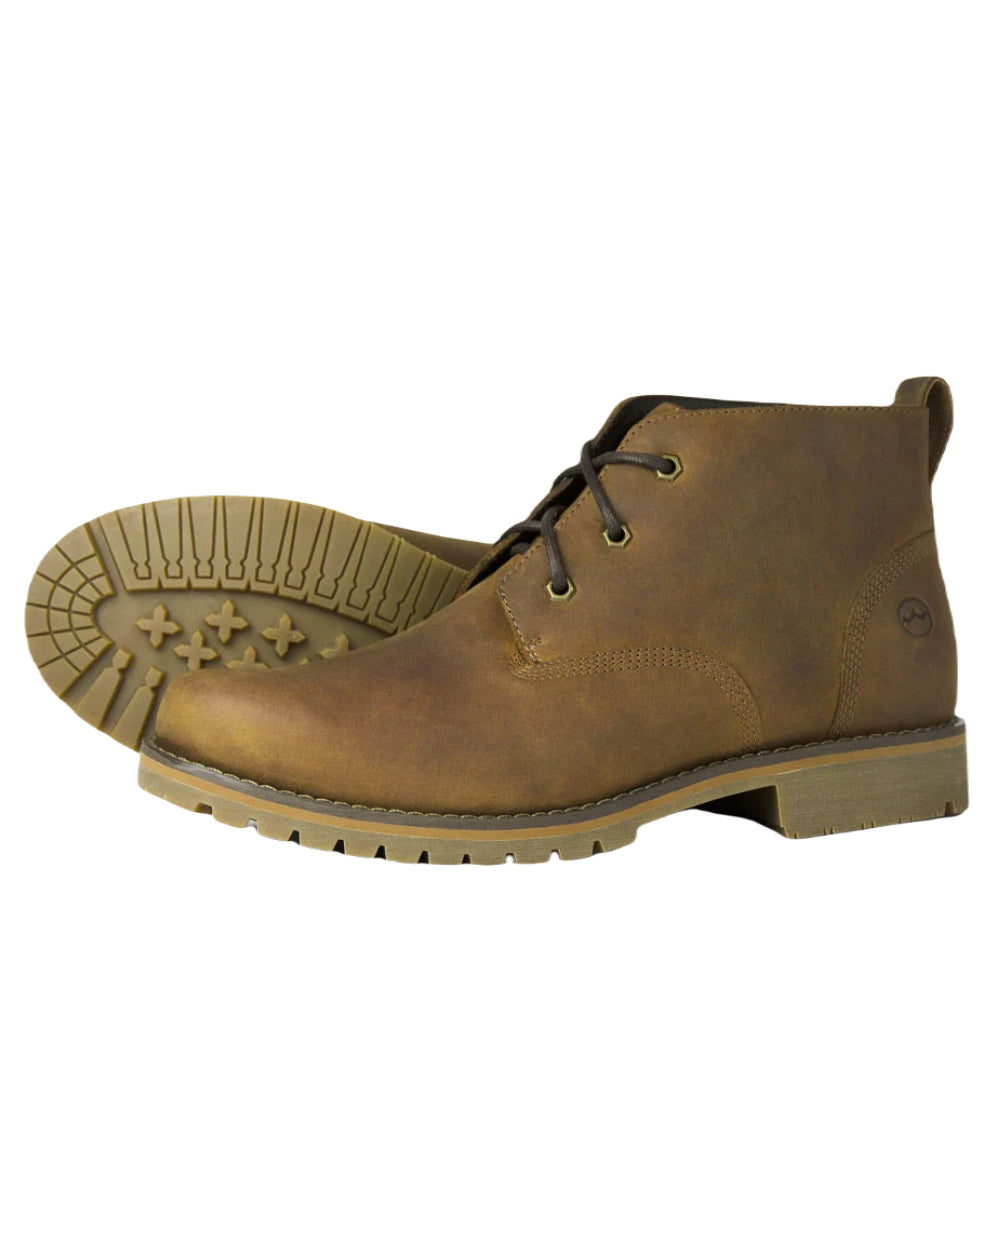 Sand Coloured Orca Bay York Mens Leather Boots On A White Background